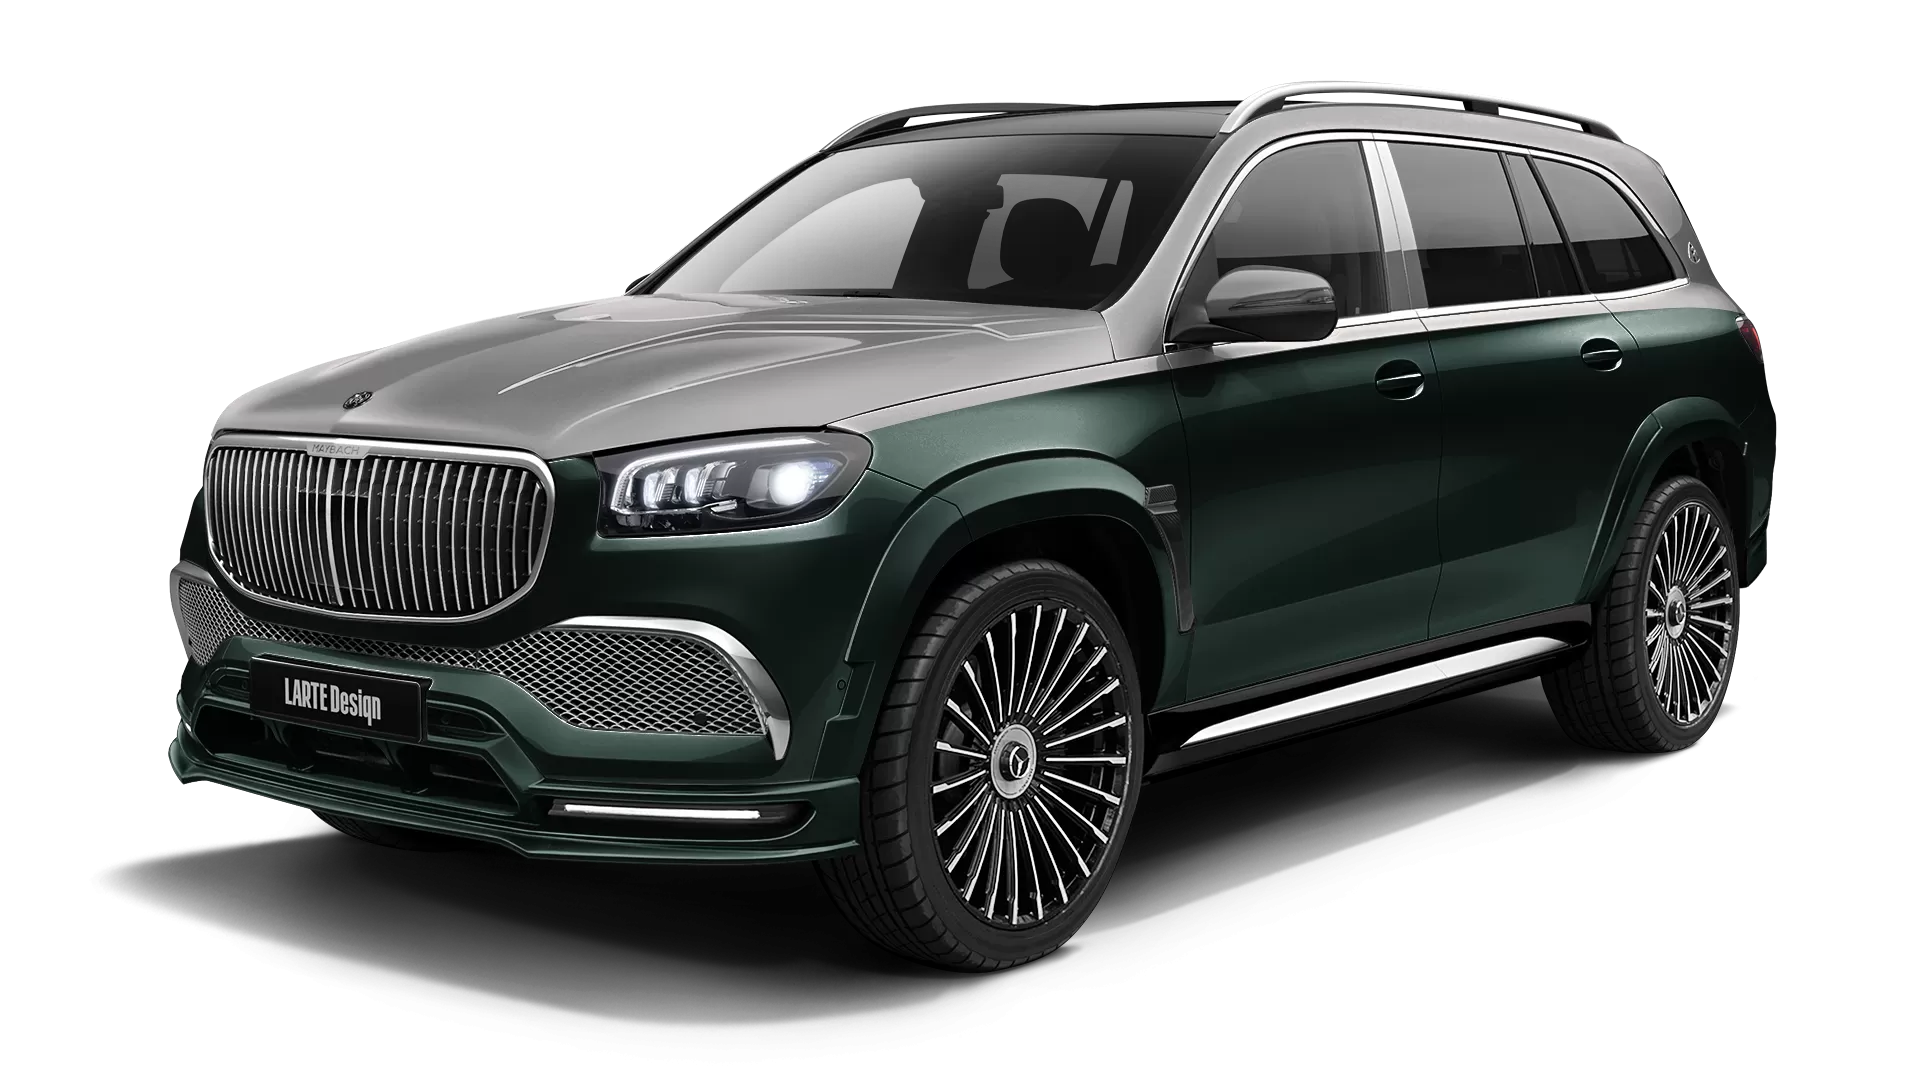 Mercedes Maybach GLS 600 with painted body kit: front view shown in Emerald Green & Mojave Silver